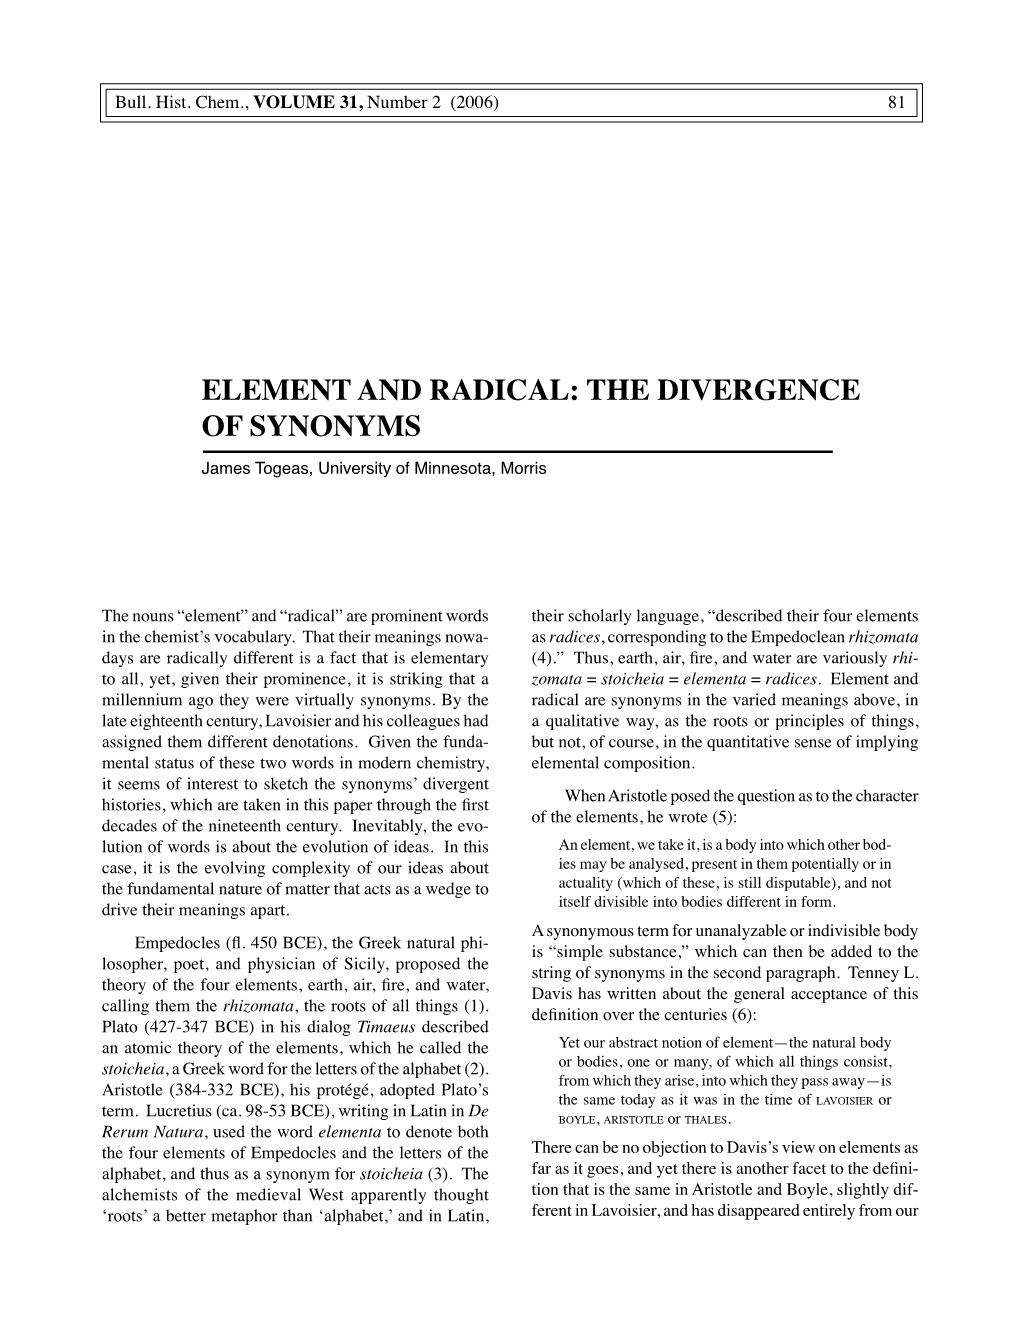 ELEMENT and RADICAL: the DIVERGENCE of SYNONYMS James Togeas, University of Minnesota, Morris